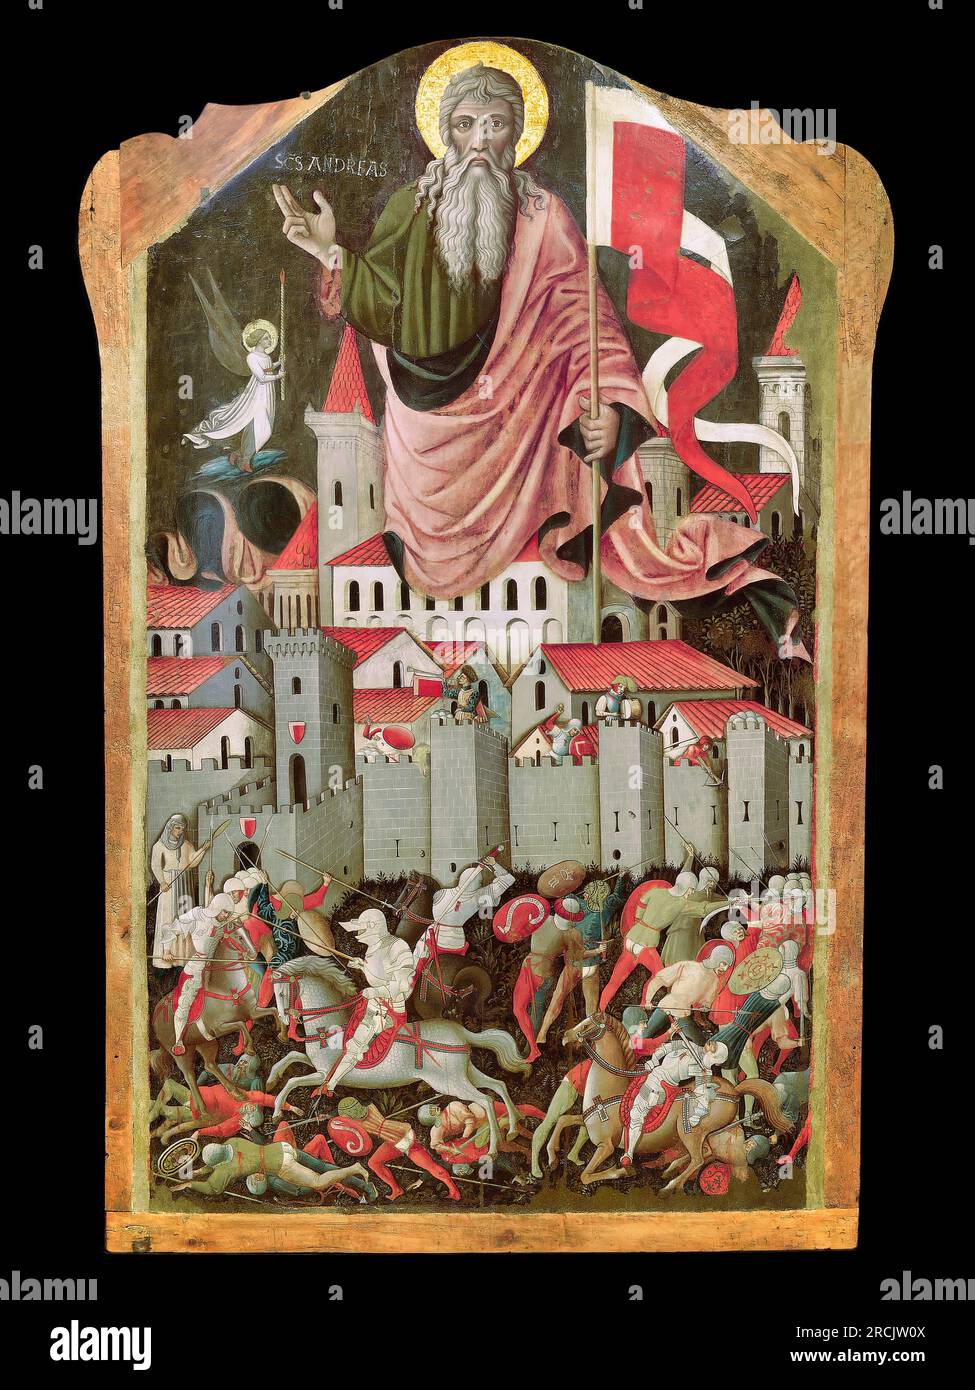 Nicola di Ulisse da Siena, St. Andrew and the battle between Ginesini and Fermani, about 1463, tempera on wood, in San Ginesio (Italy). Stock Photo